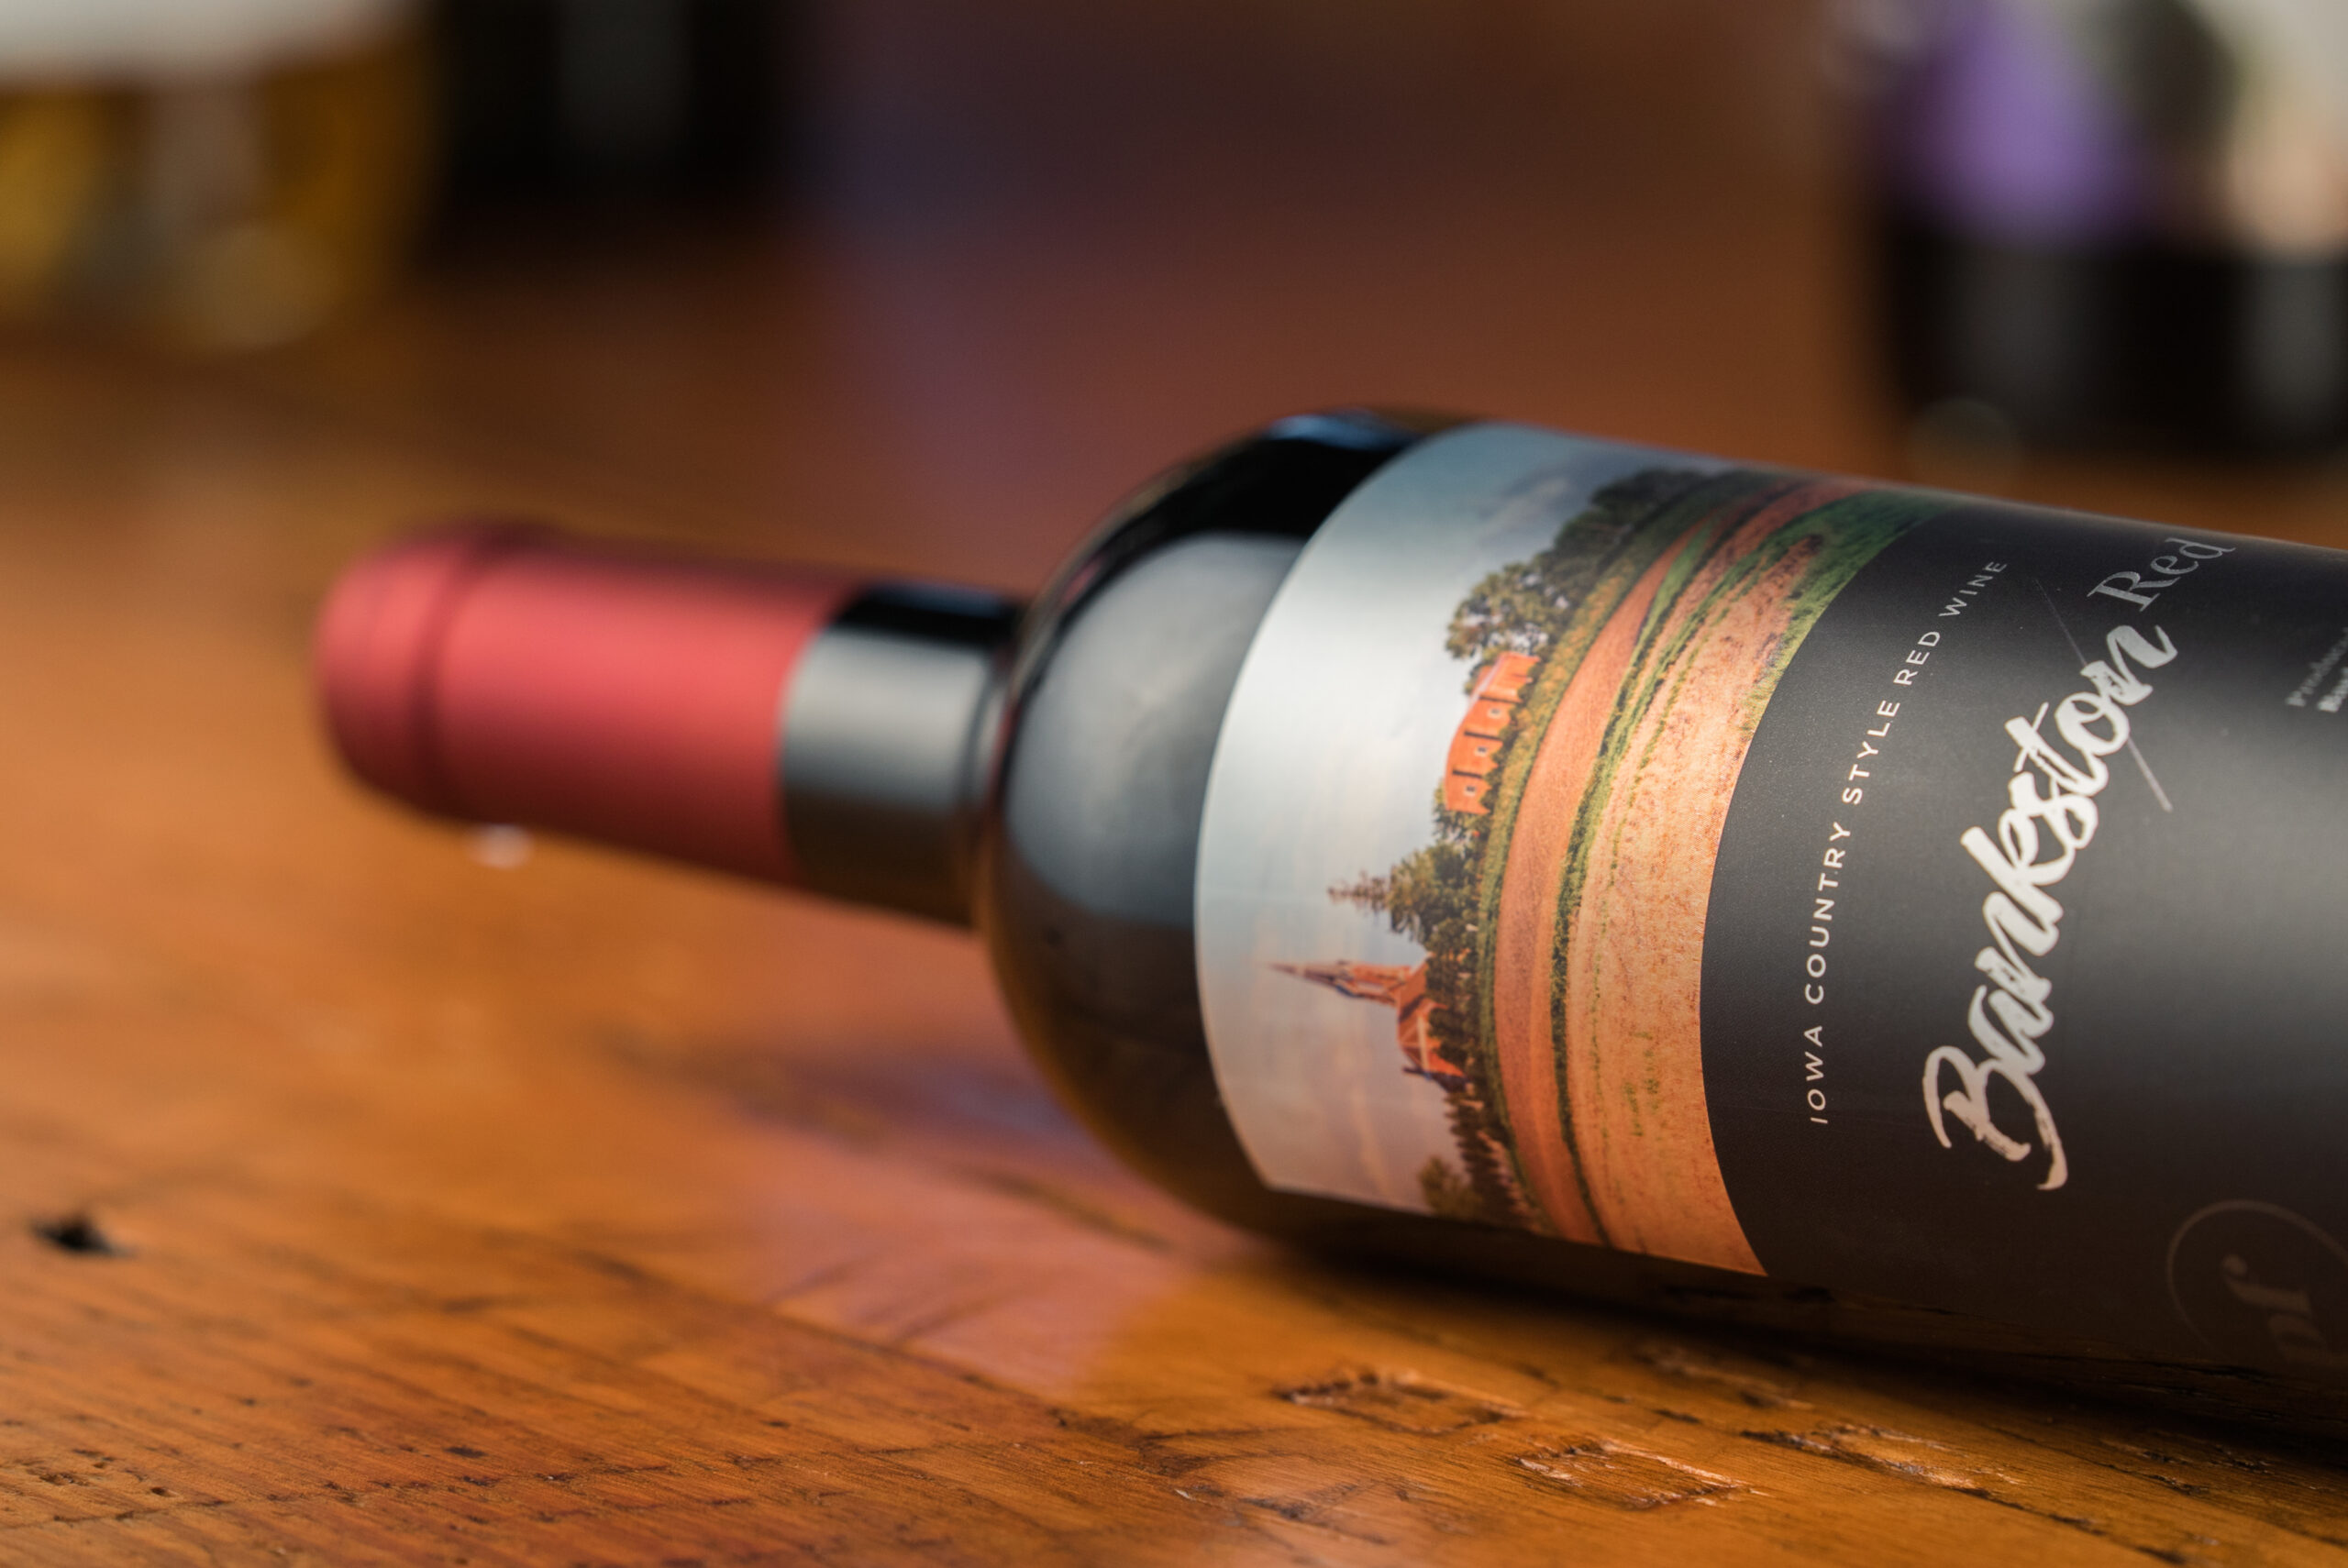 Image of a digitally-printed wine label for Park Farm.